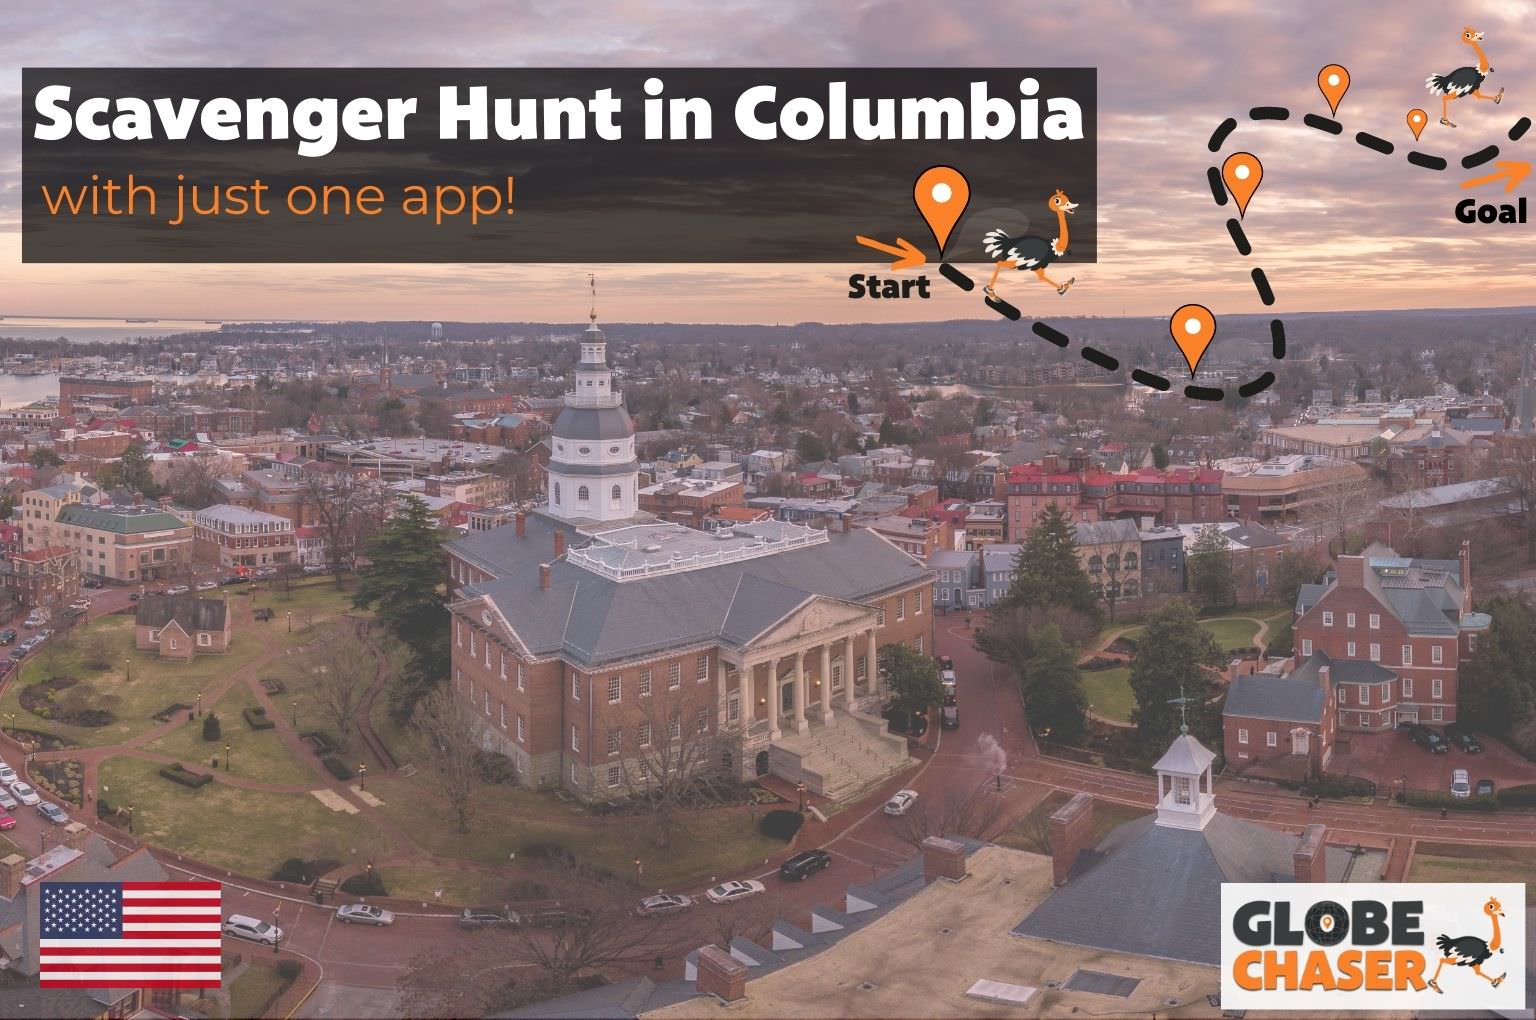 Scavenger Hunt in Columbia, USA - Family Activities with the Globe Chaser App for Outdoor Fun